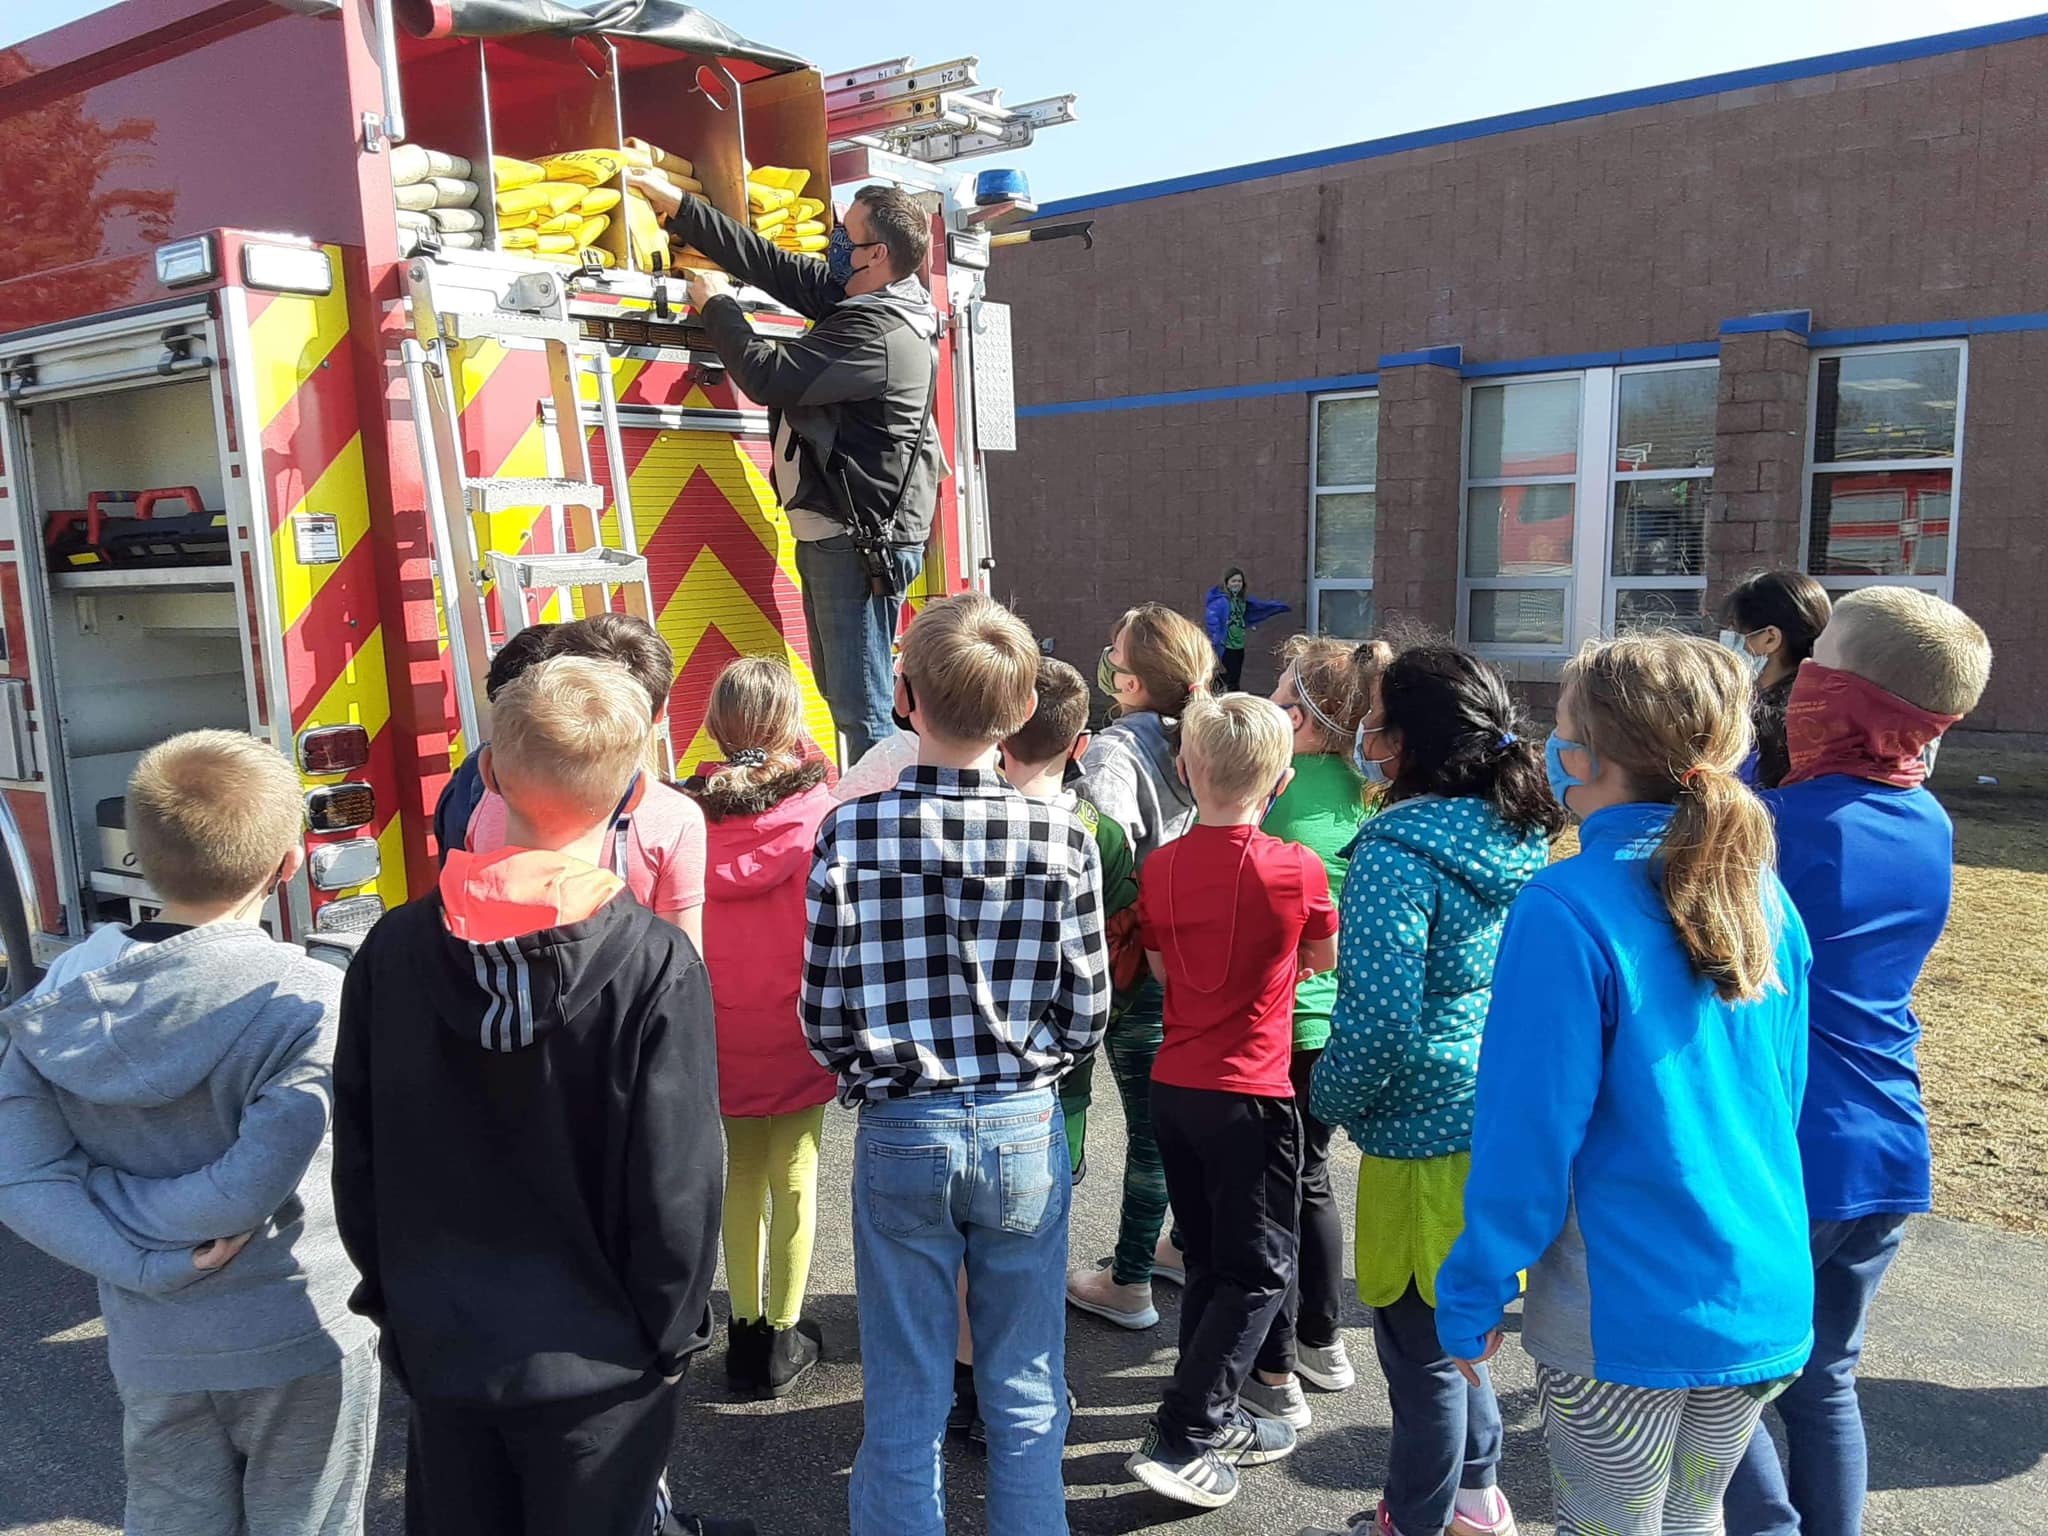 Students looking at someone on a firetruck